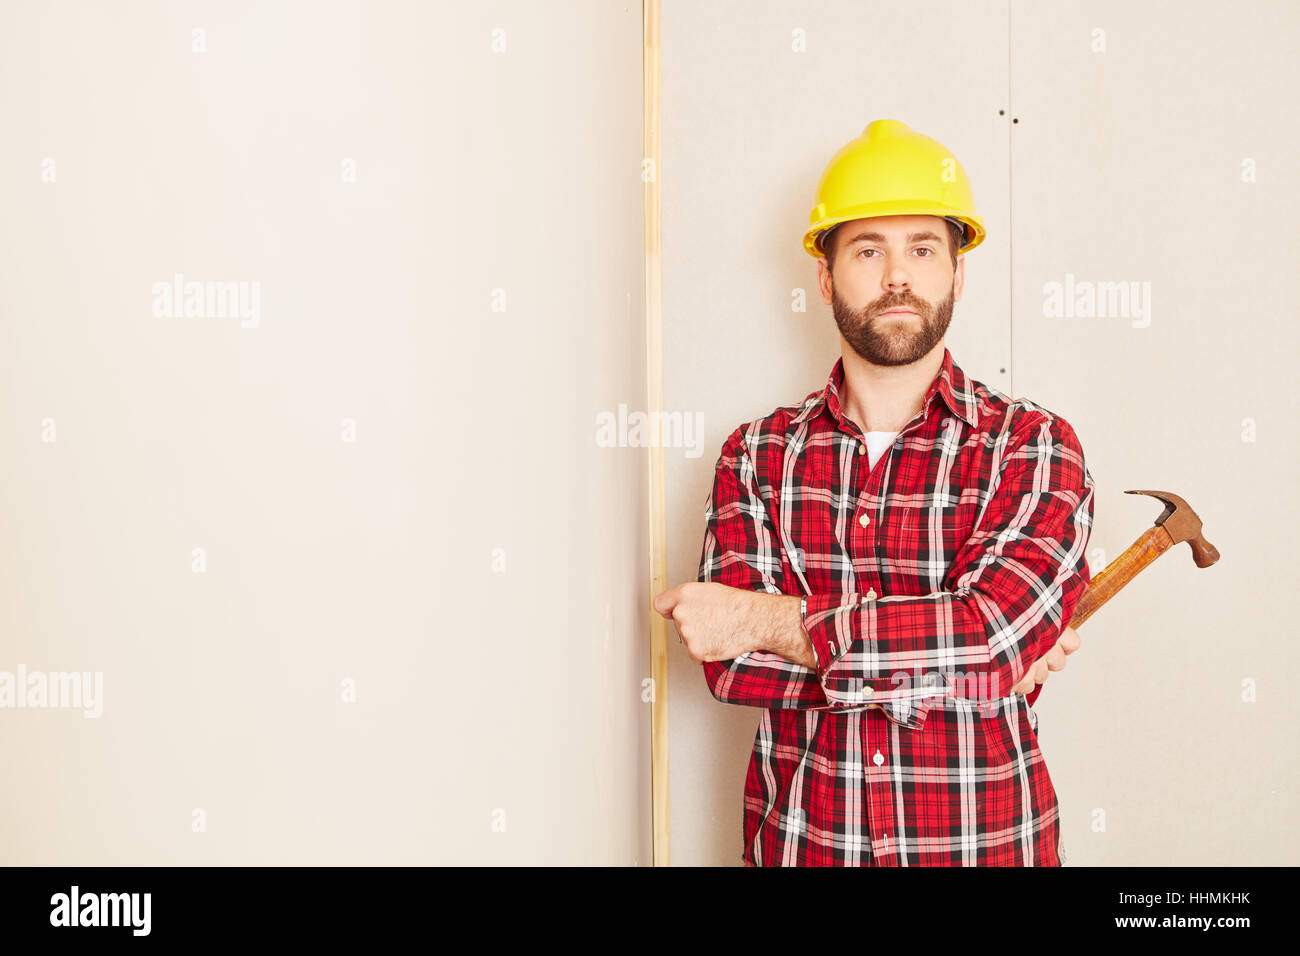 Carpenter with competence as profession add Stock Photo